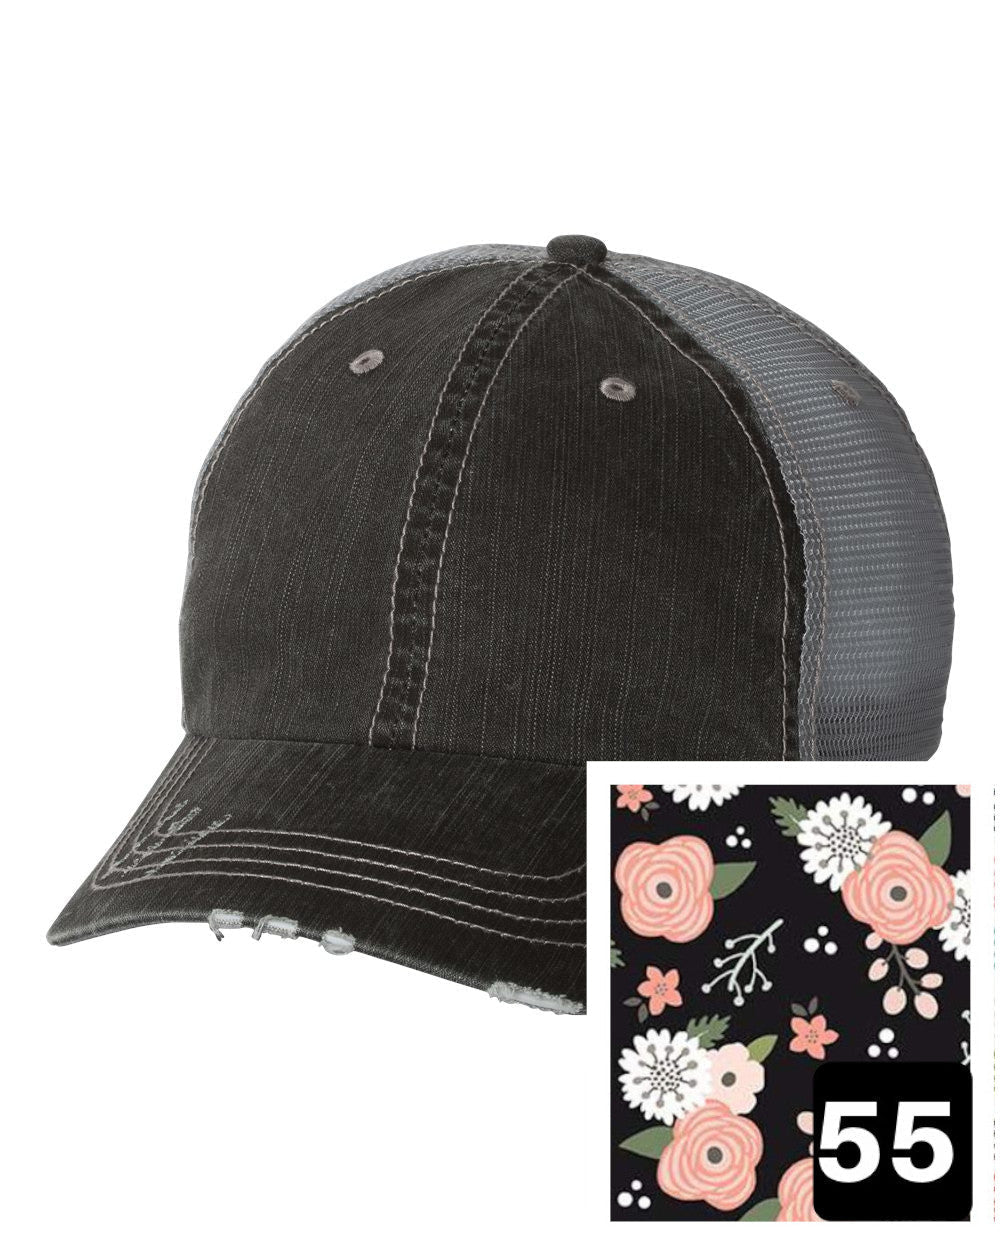 gray distressed trucker hat with petite floral on navy fabric state of Minnesota